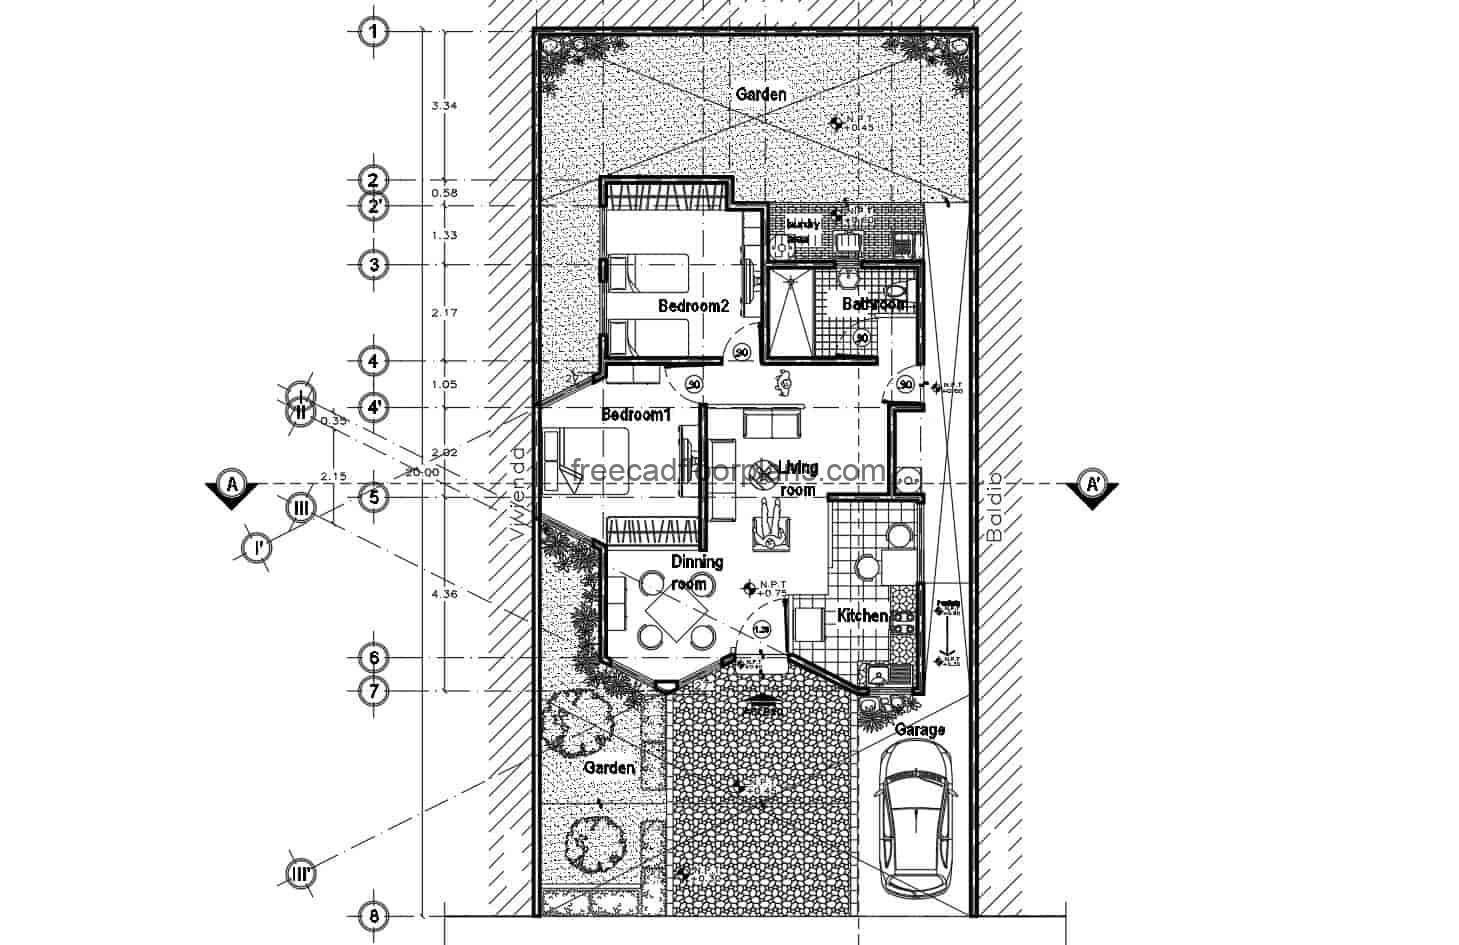 Architectural design plan in DWG format from Autocad single level with two rooms, plans for free download editable